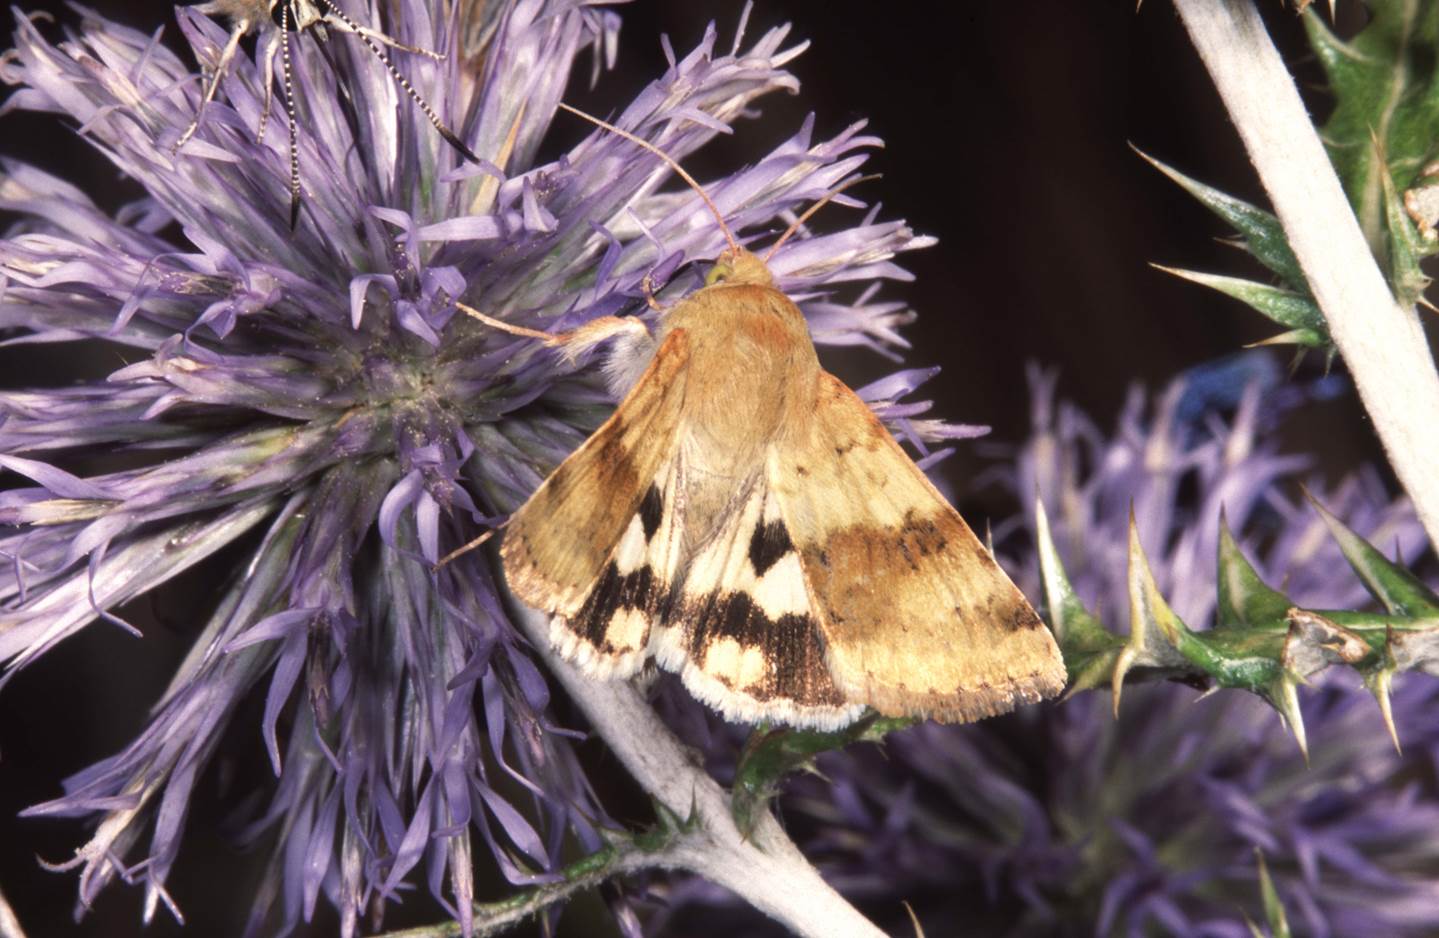 A moth on a flower

Description automatically generated